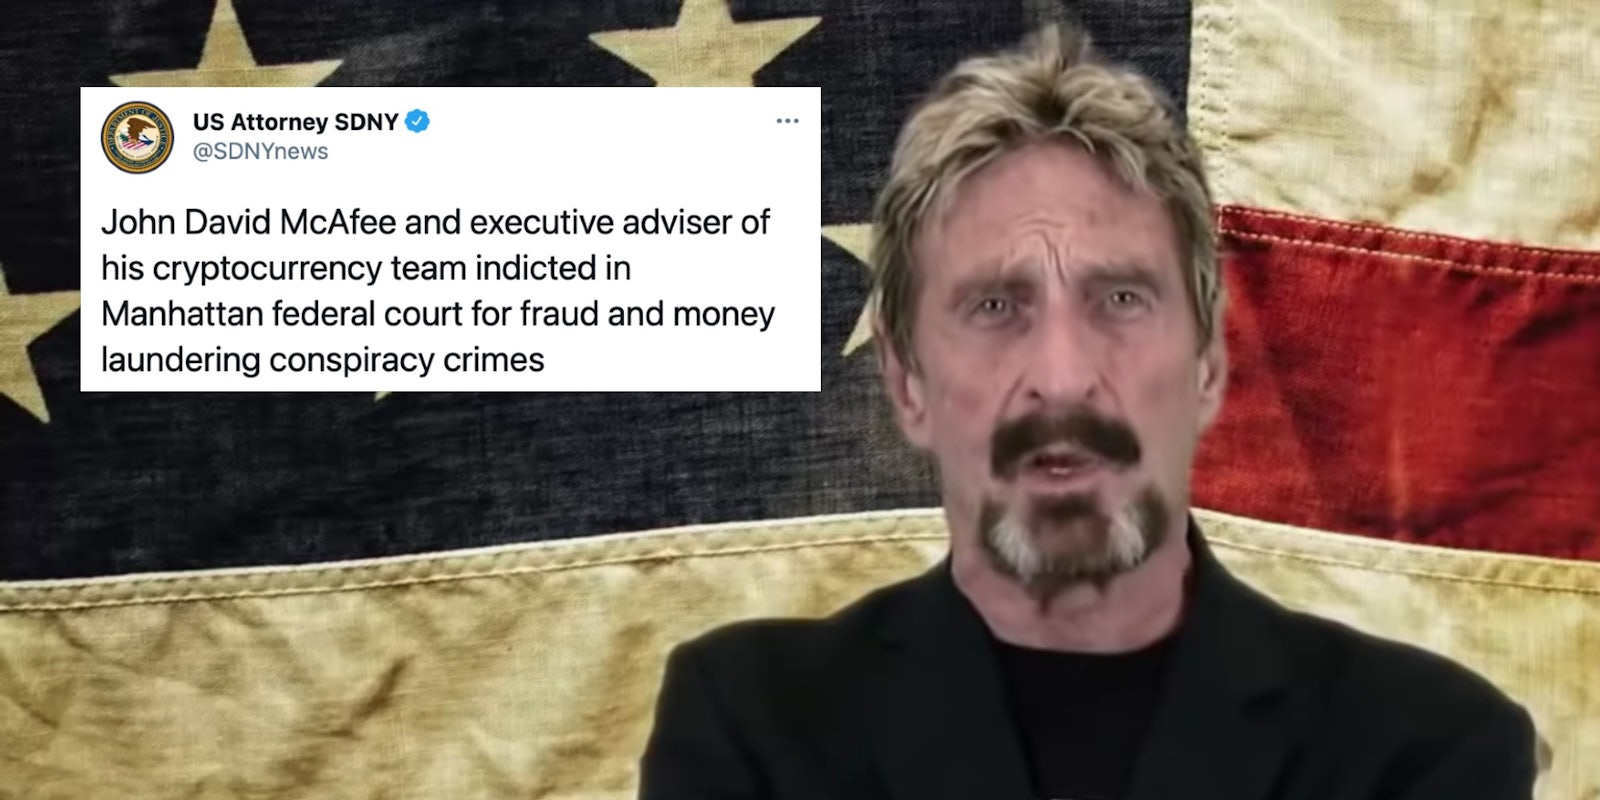 John McAfee and a tweet about criminal charges